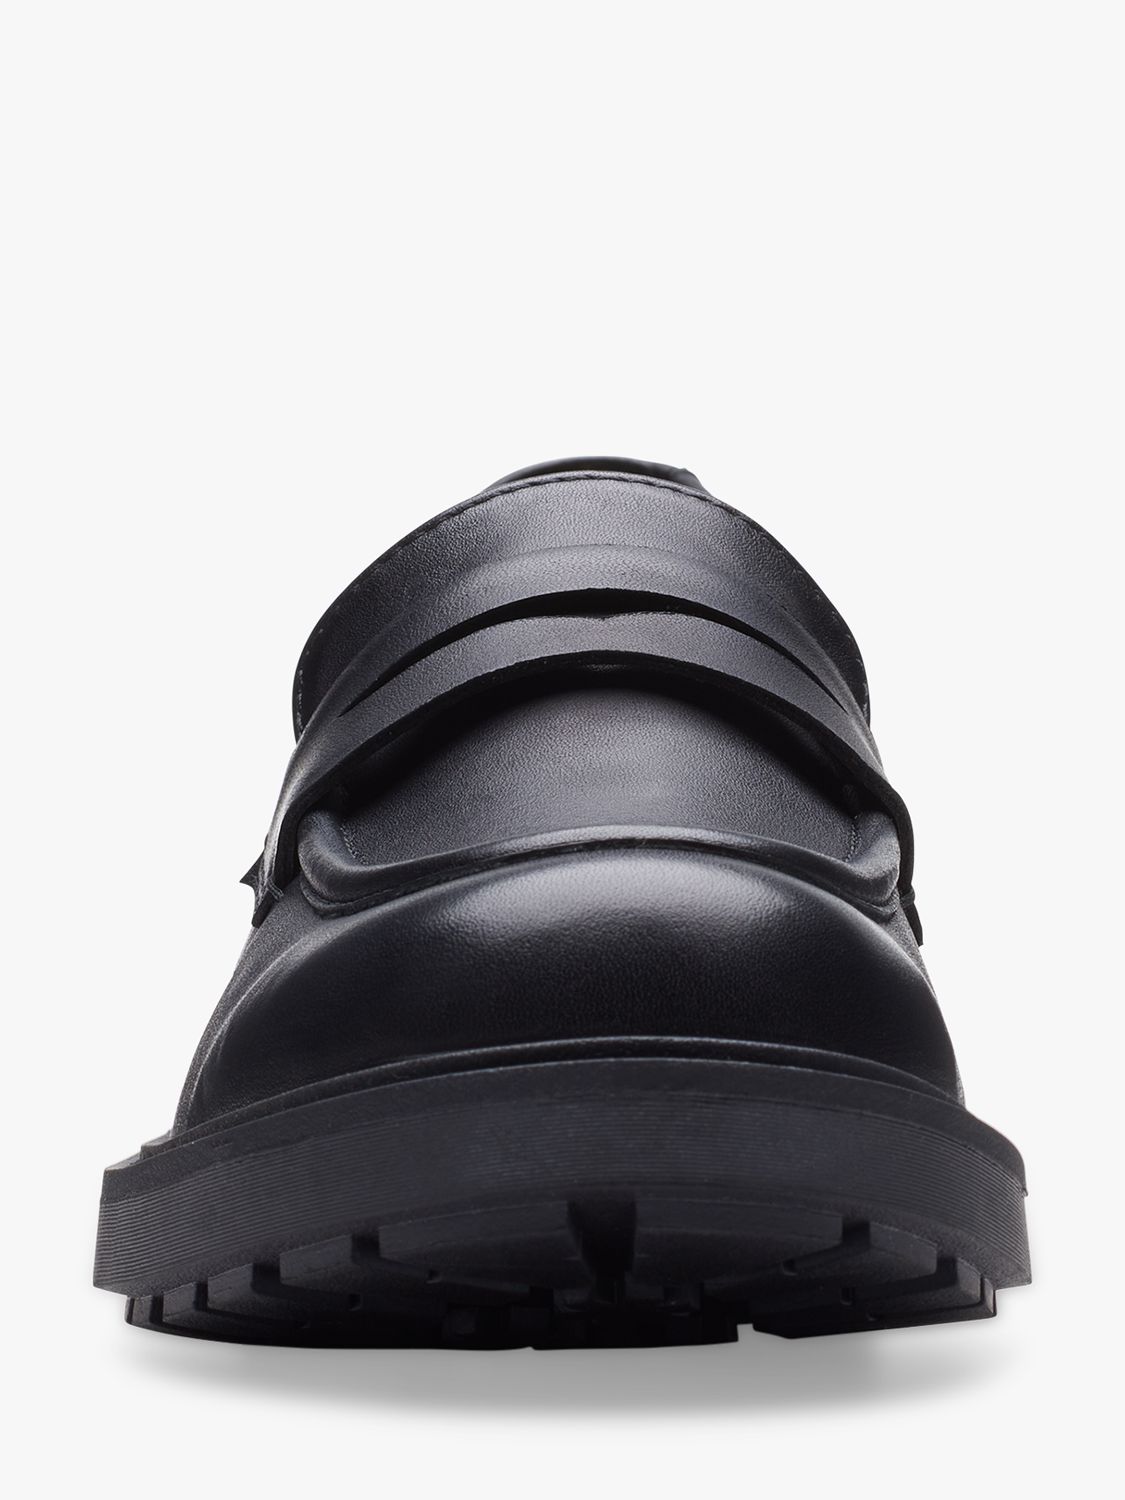 Clarks Orinoco 2 Penny Leather Loafers, Black at John Lewis & Partners